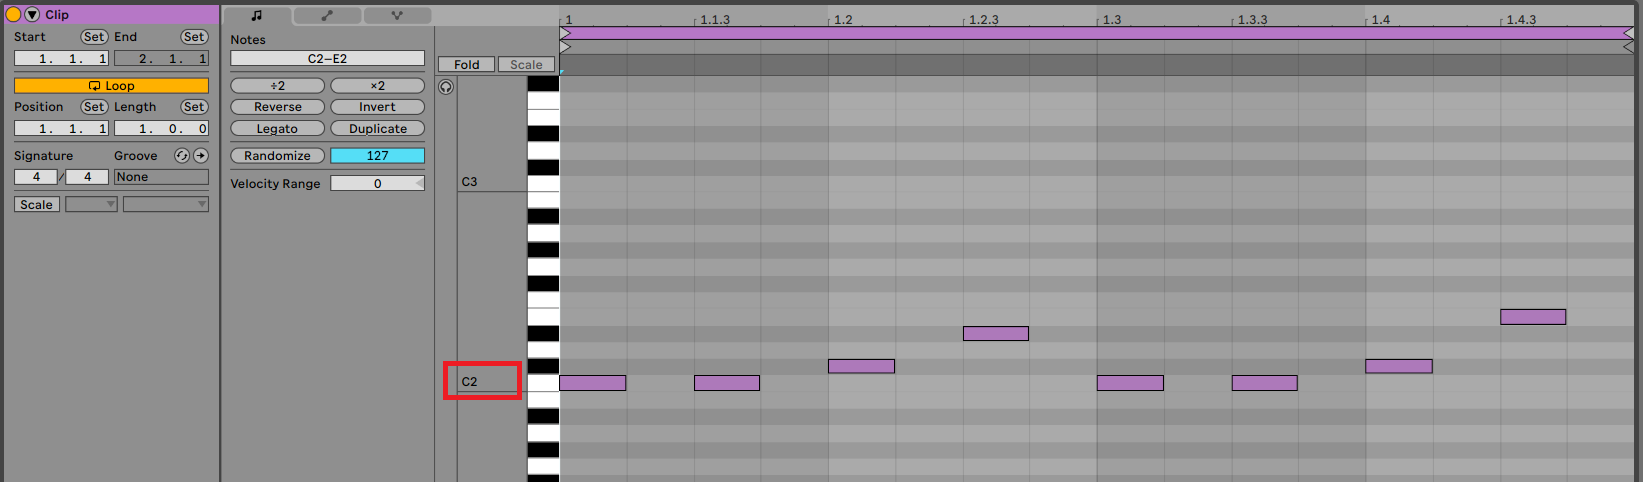 ableton_piano_roll.PNG